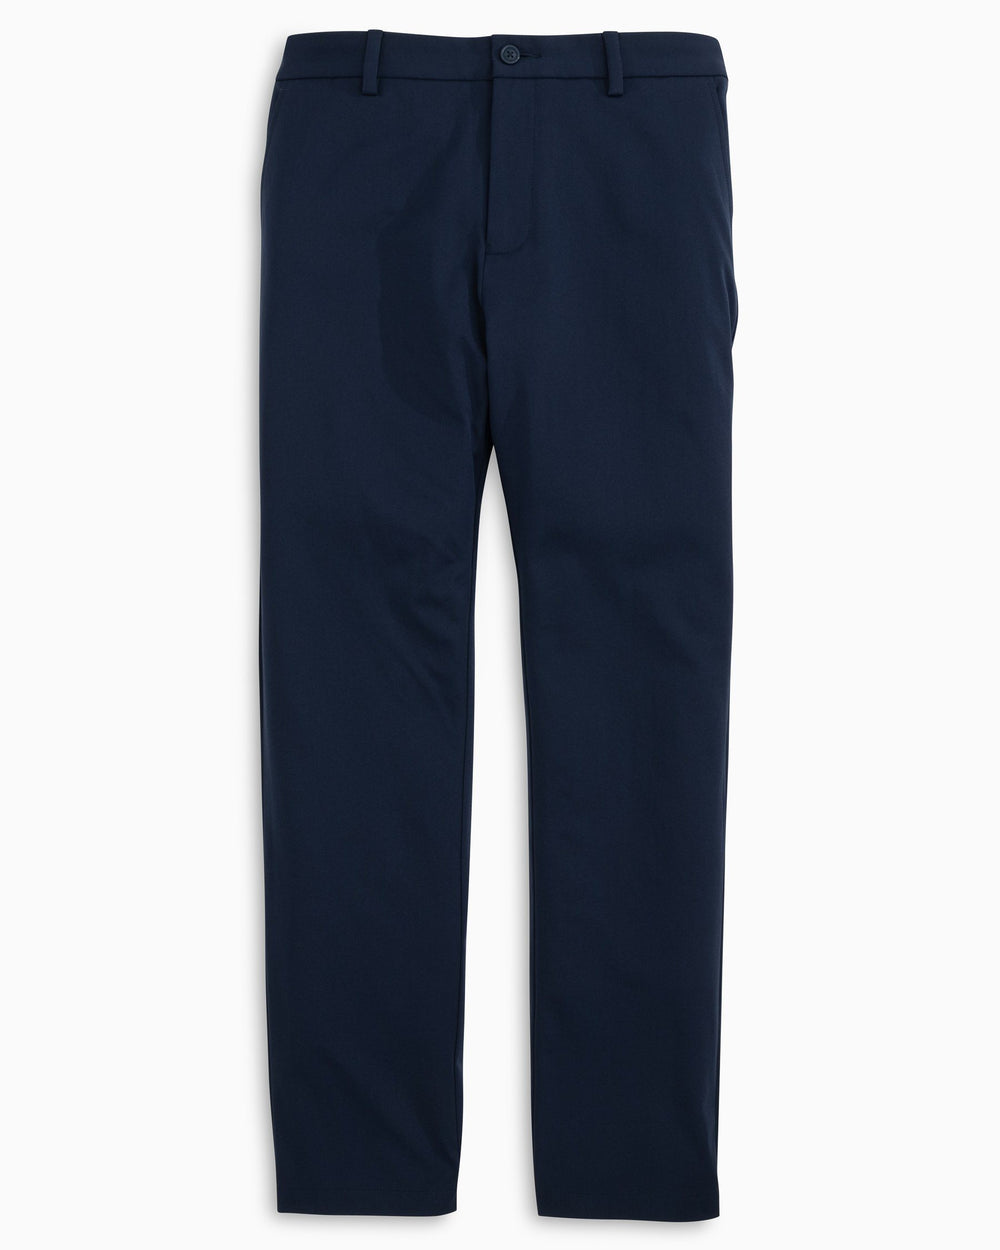 The flat front view of the Men's Jack Performance Pant by Southern Tide - True Navy